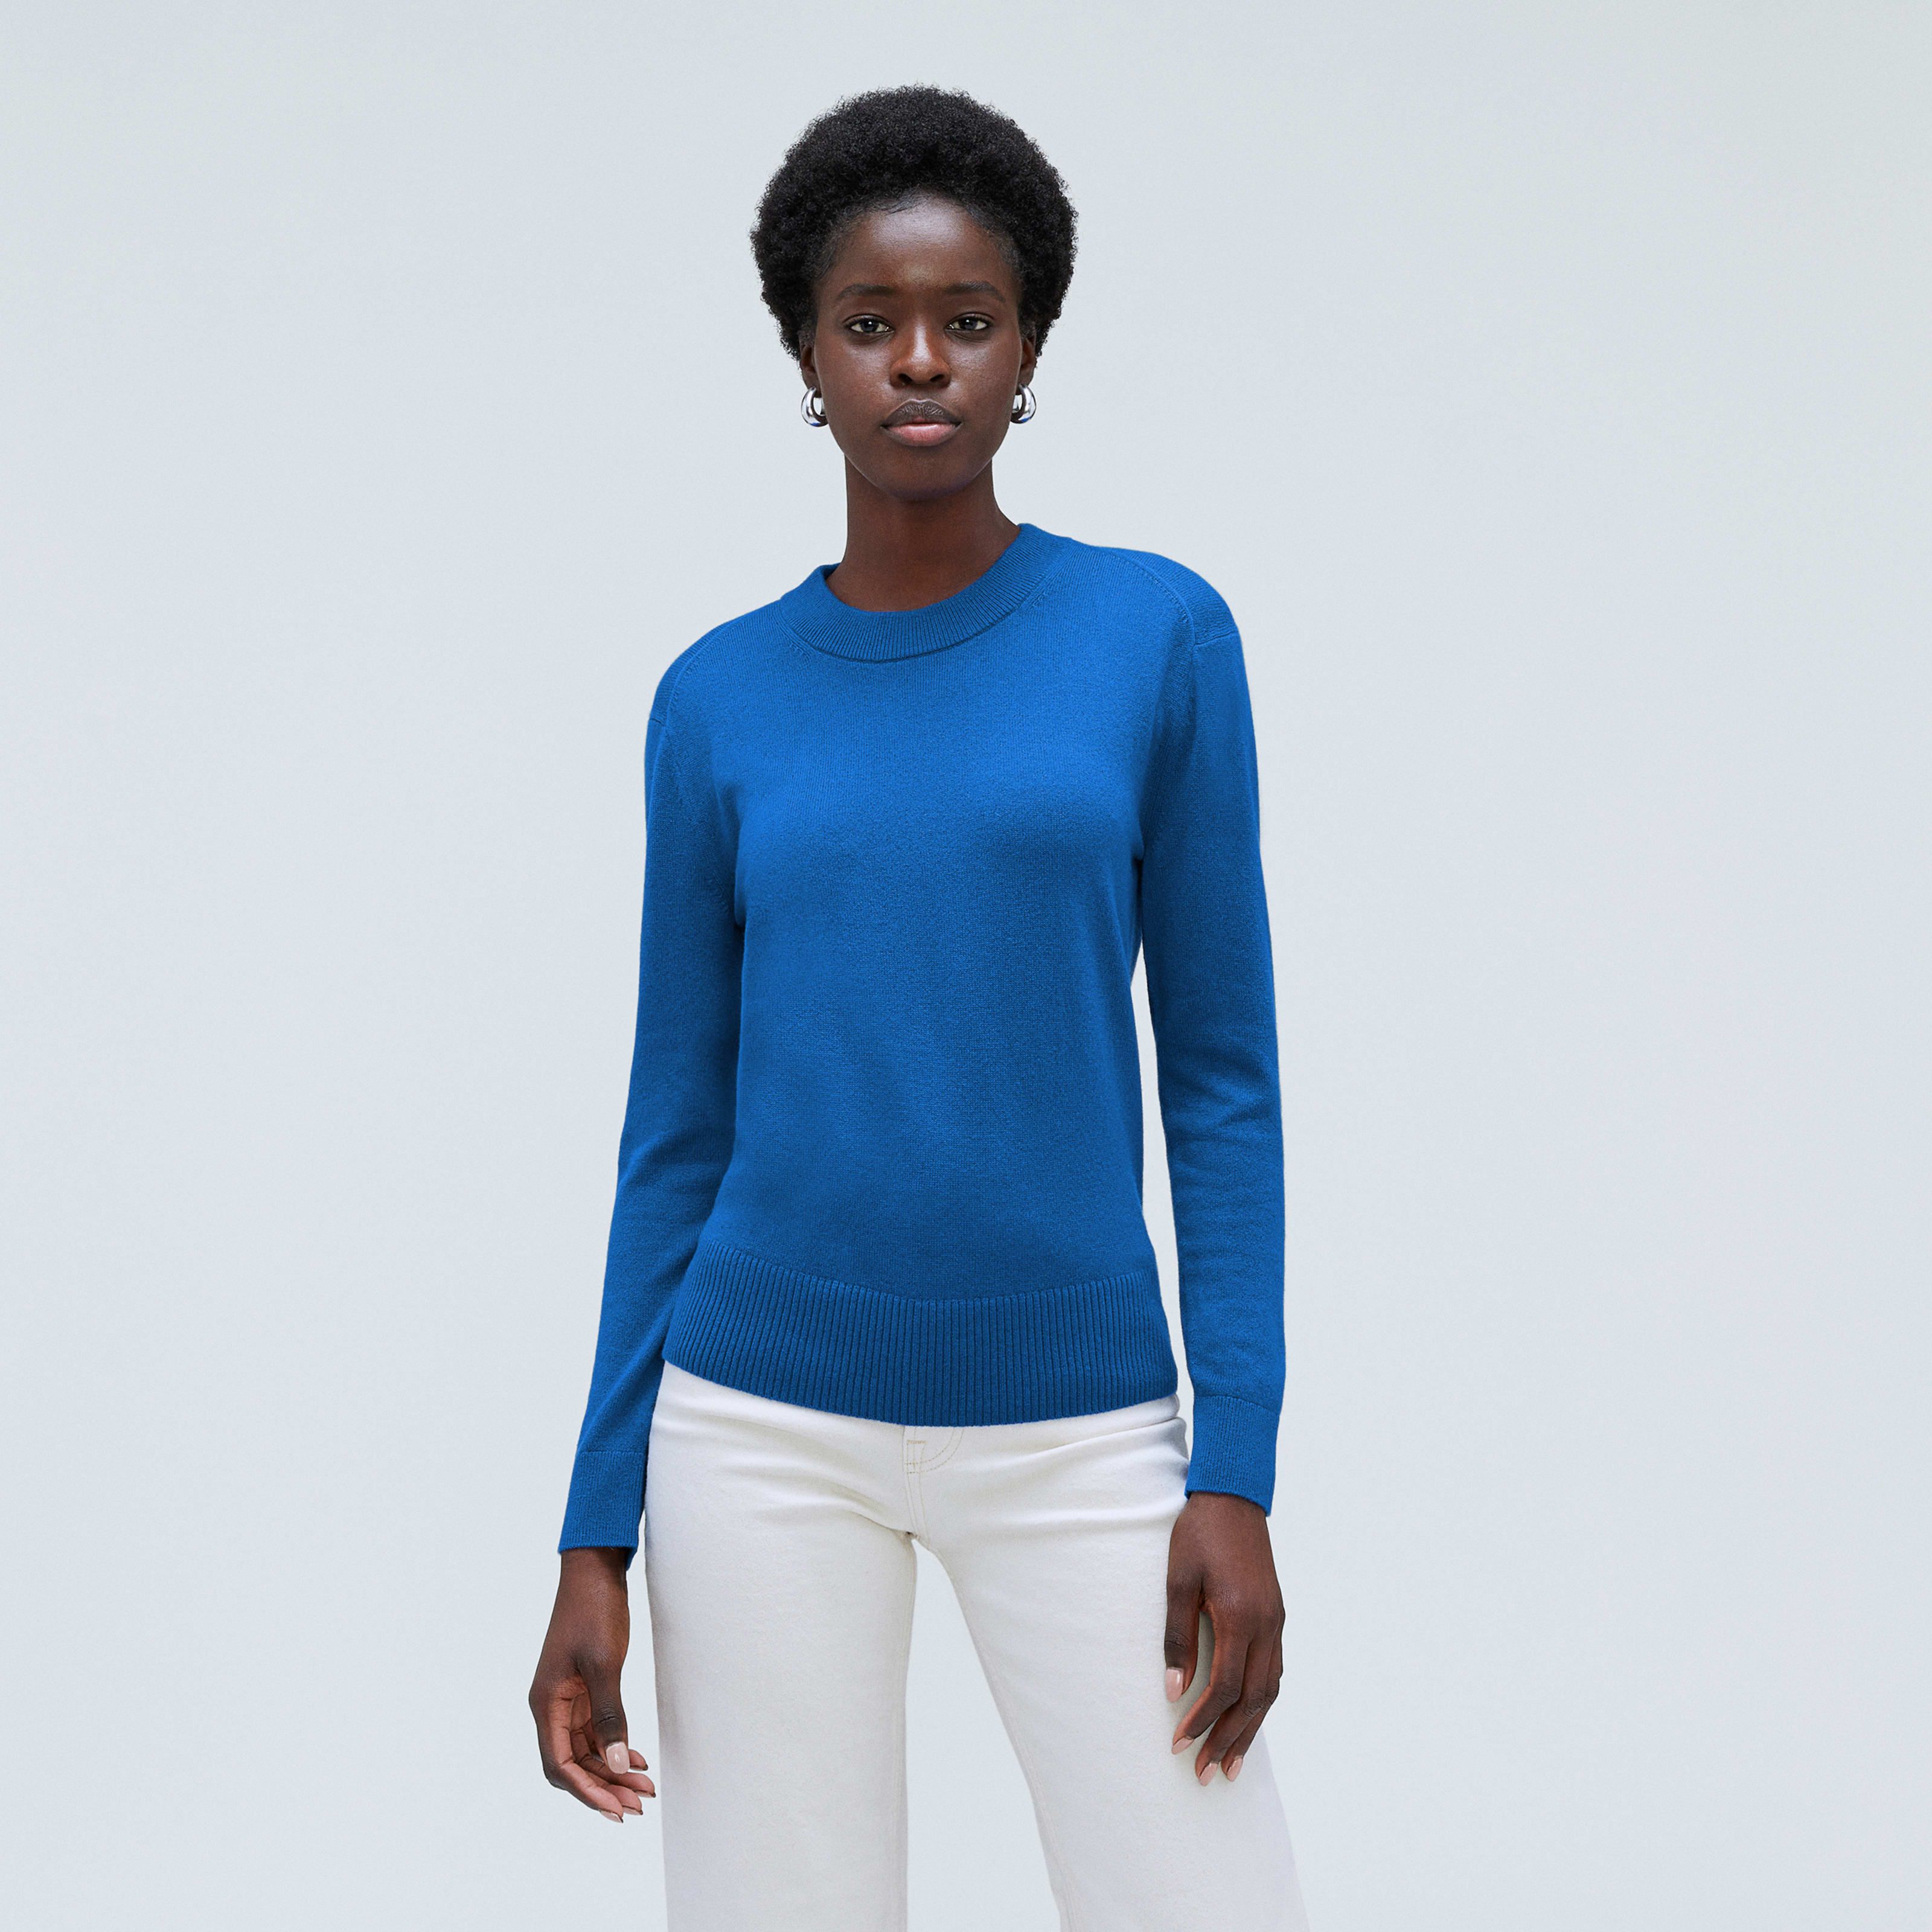 Women's Cashmere Crew Sweater by Everlane in Lapis Blue, Size XXS | Everlane